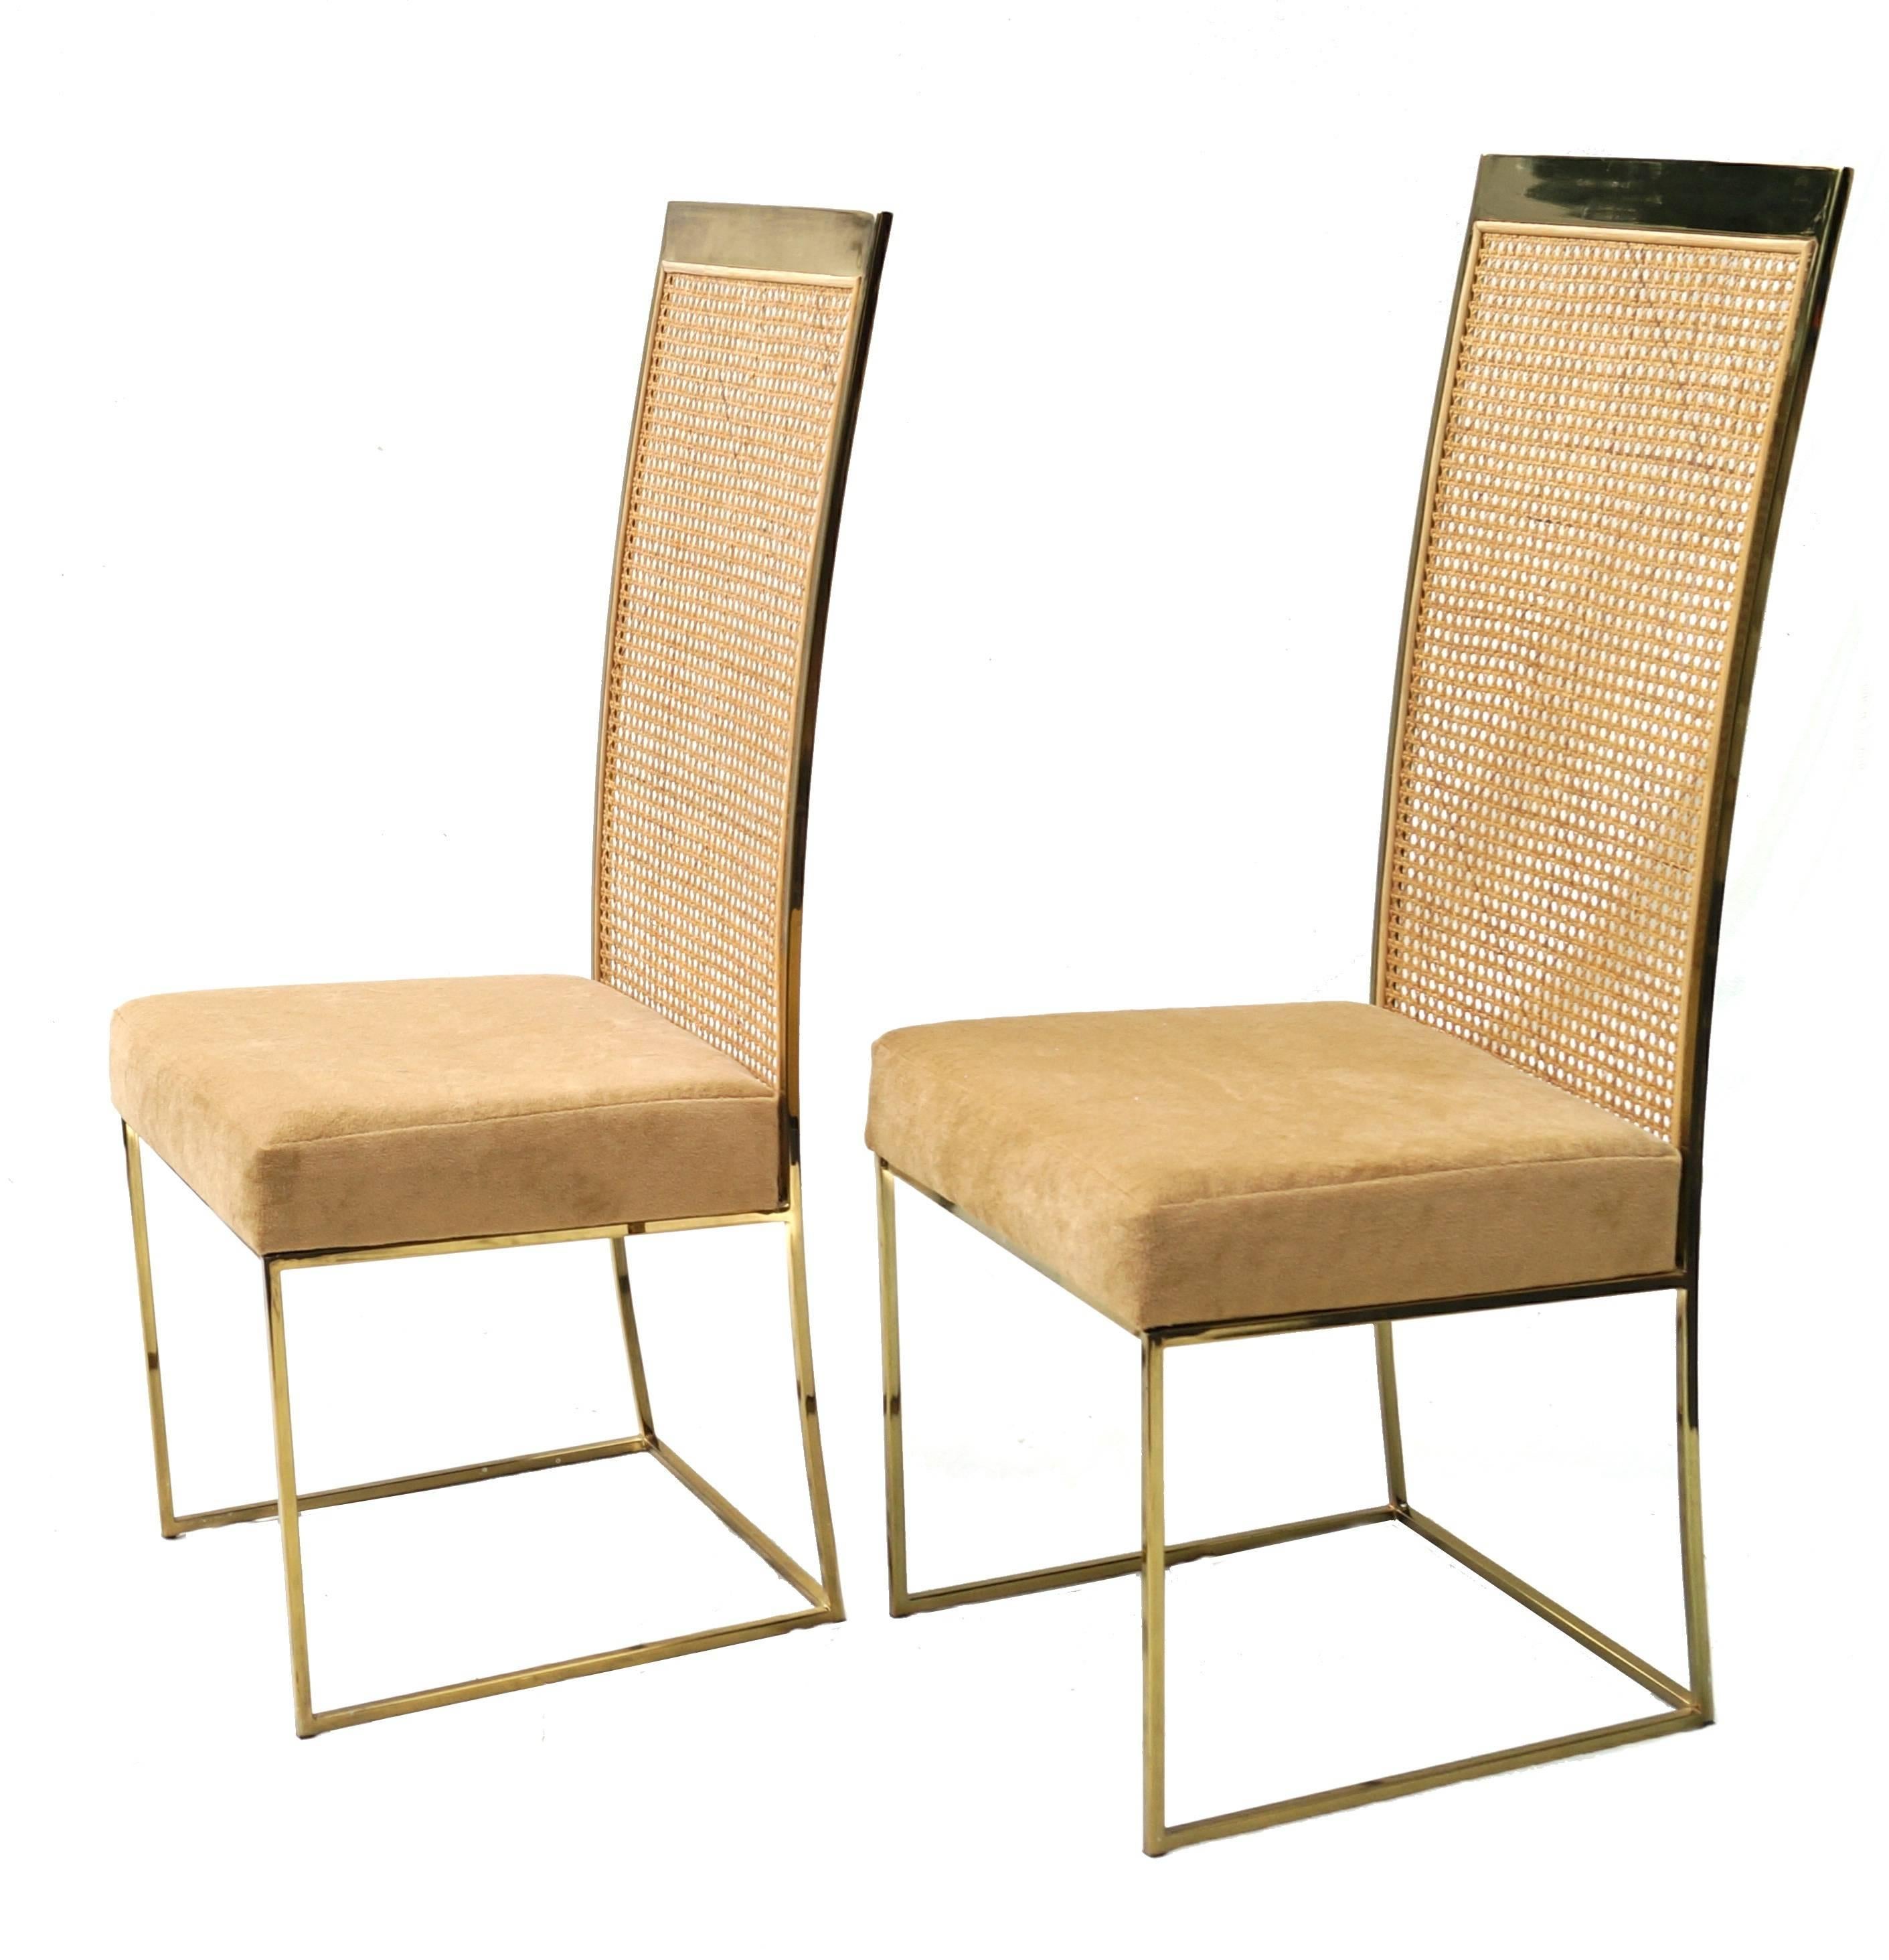 Four Milo Baughman for Thayer Coggin, brass tone cane back dining chairs.